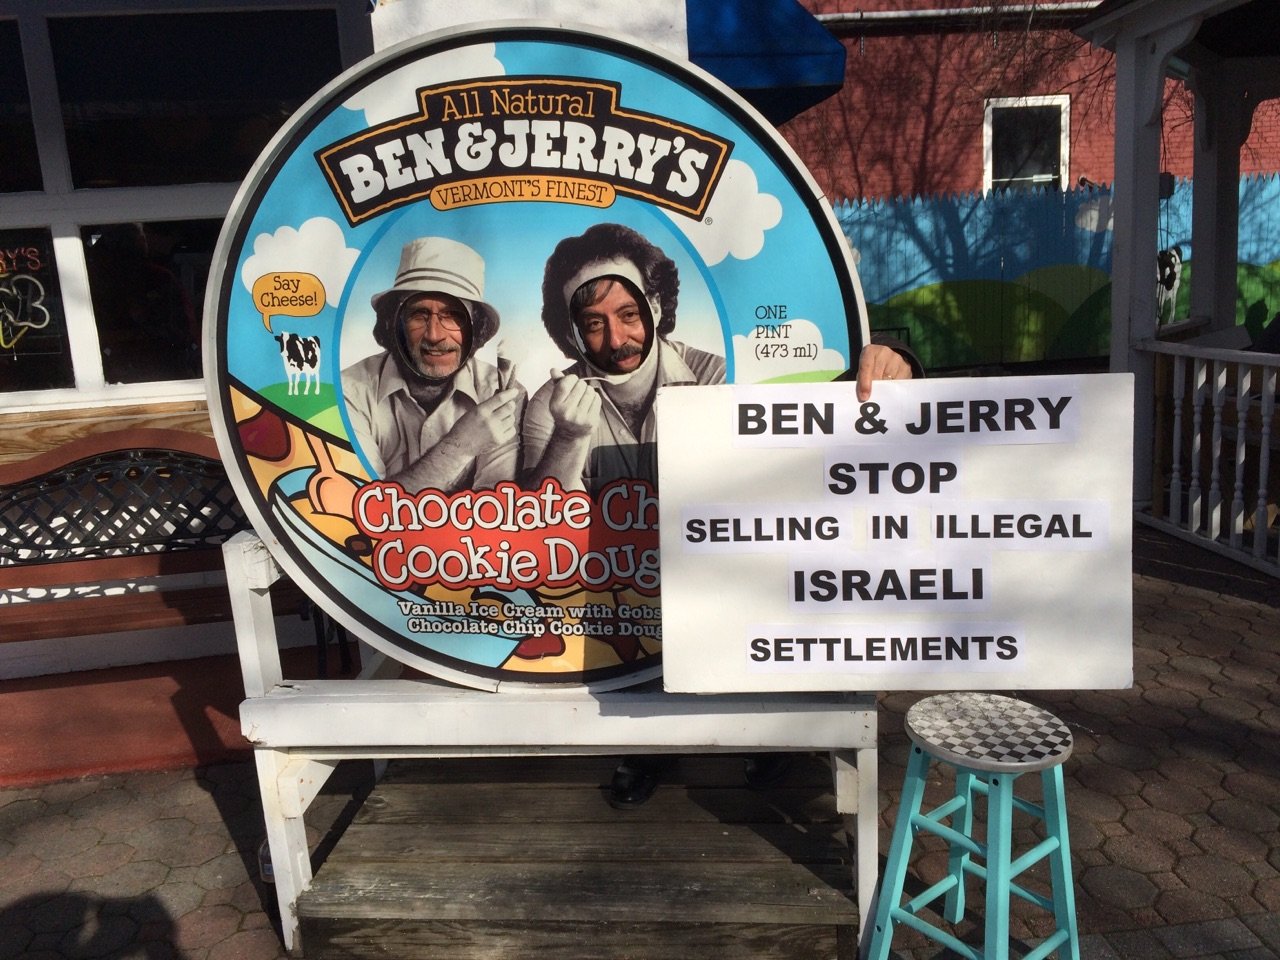 Campaign about Ben & Jerry's – Vermonters for Justice in Palestine